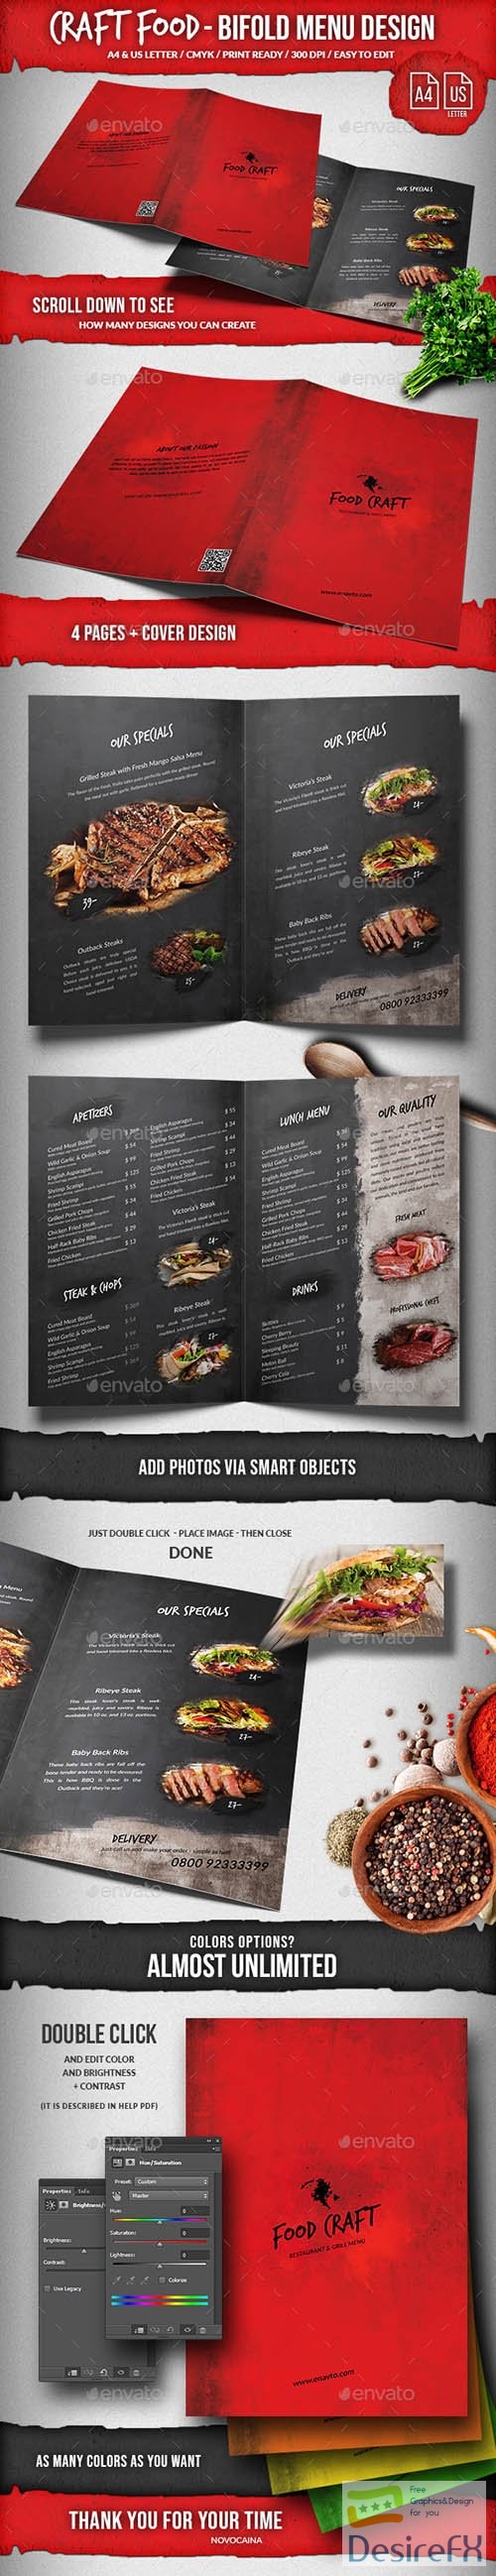 Craft Food Bifold Menu - A4 &amp; US Letter. Very Editable. 21980762